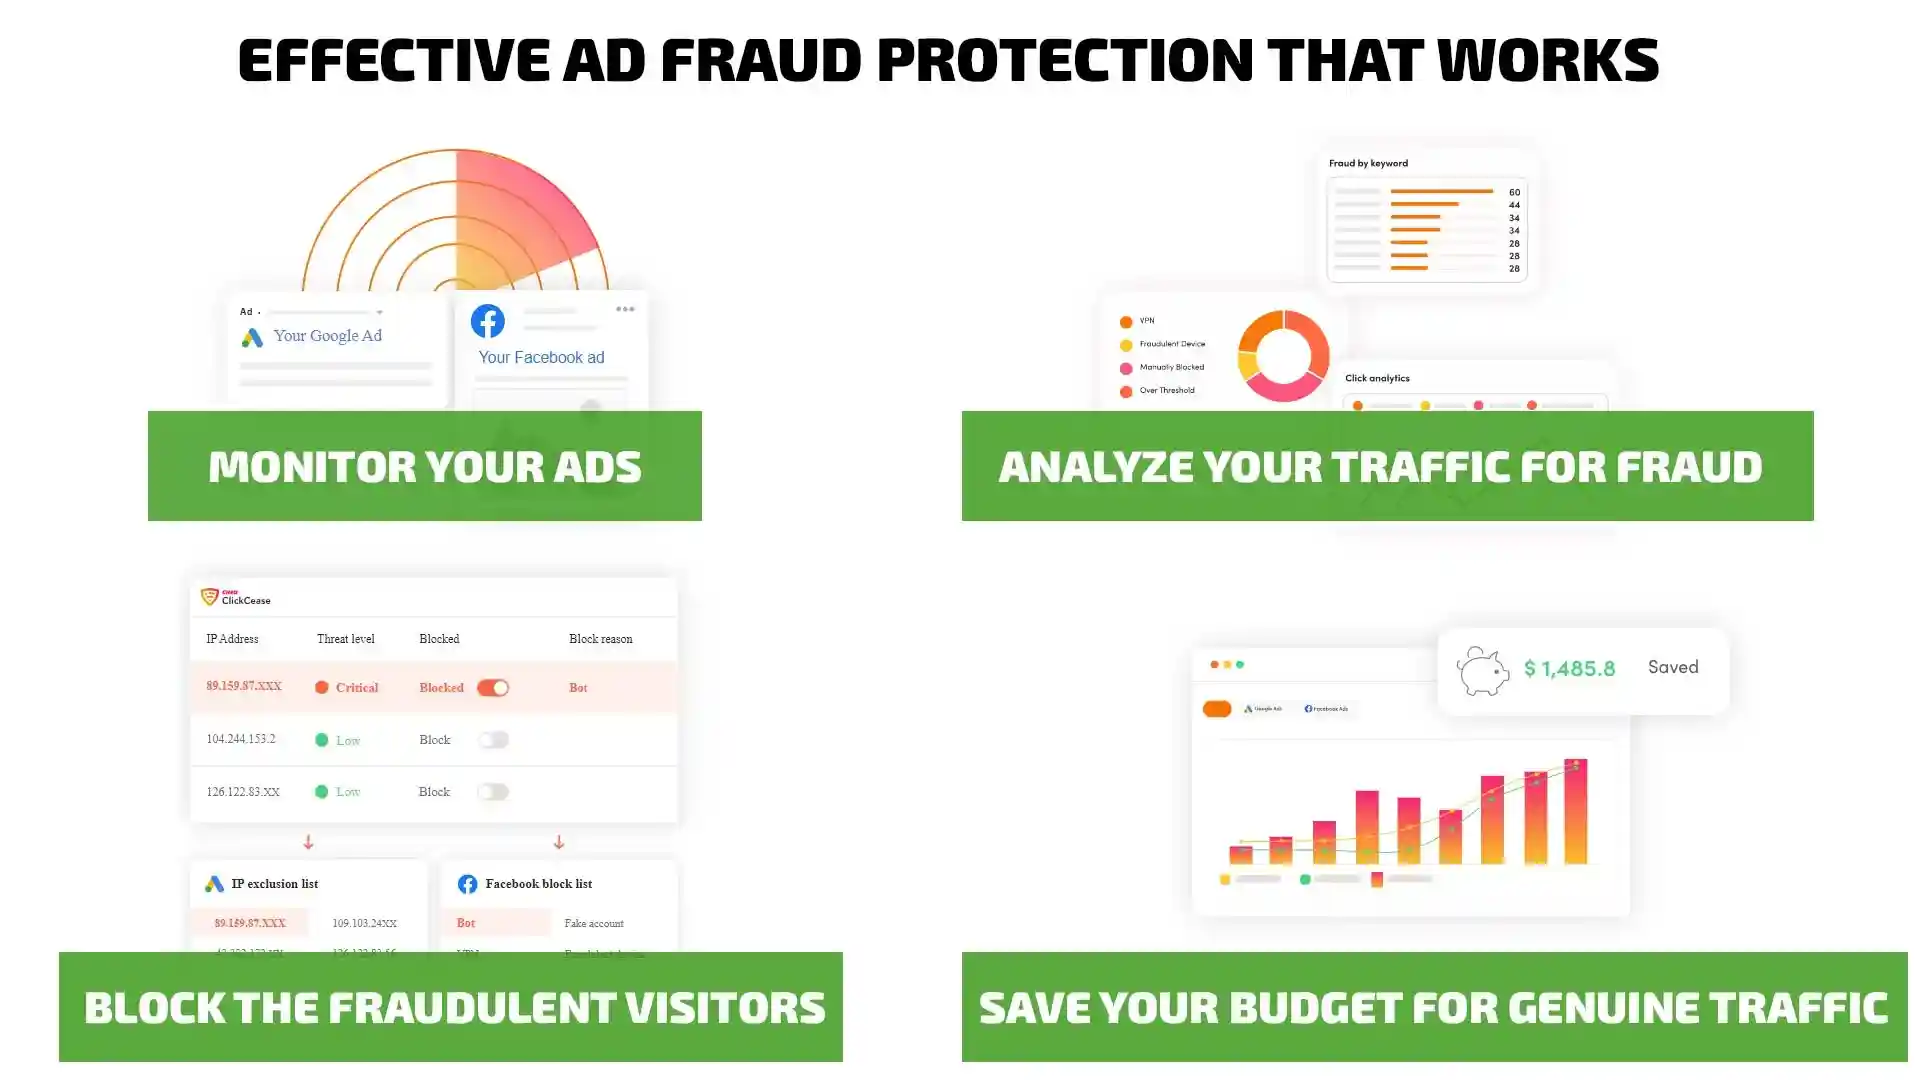 Effective ad fraud protection that works